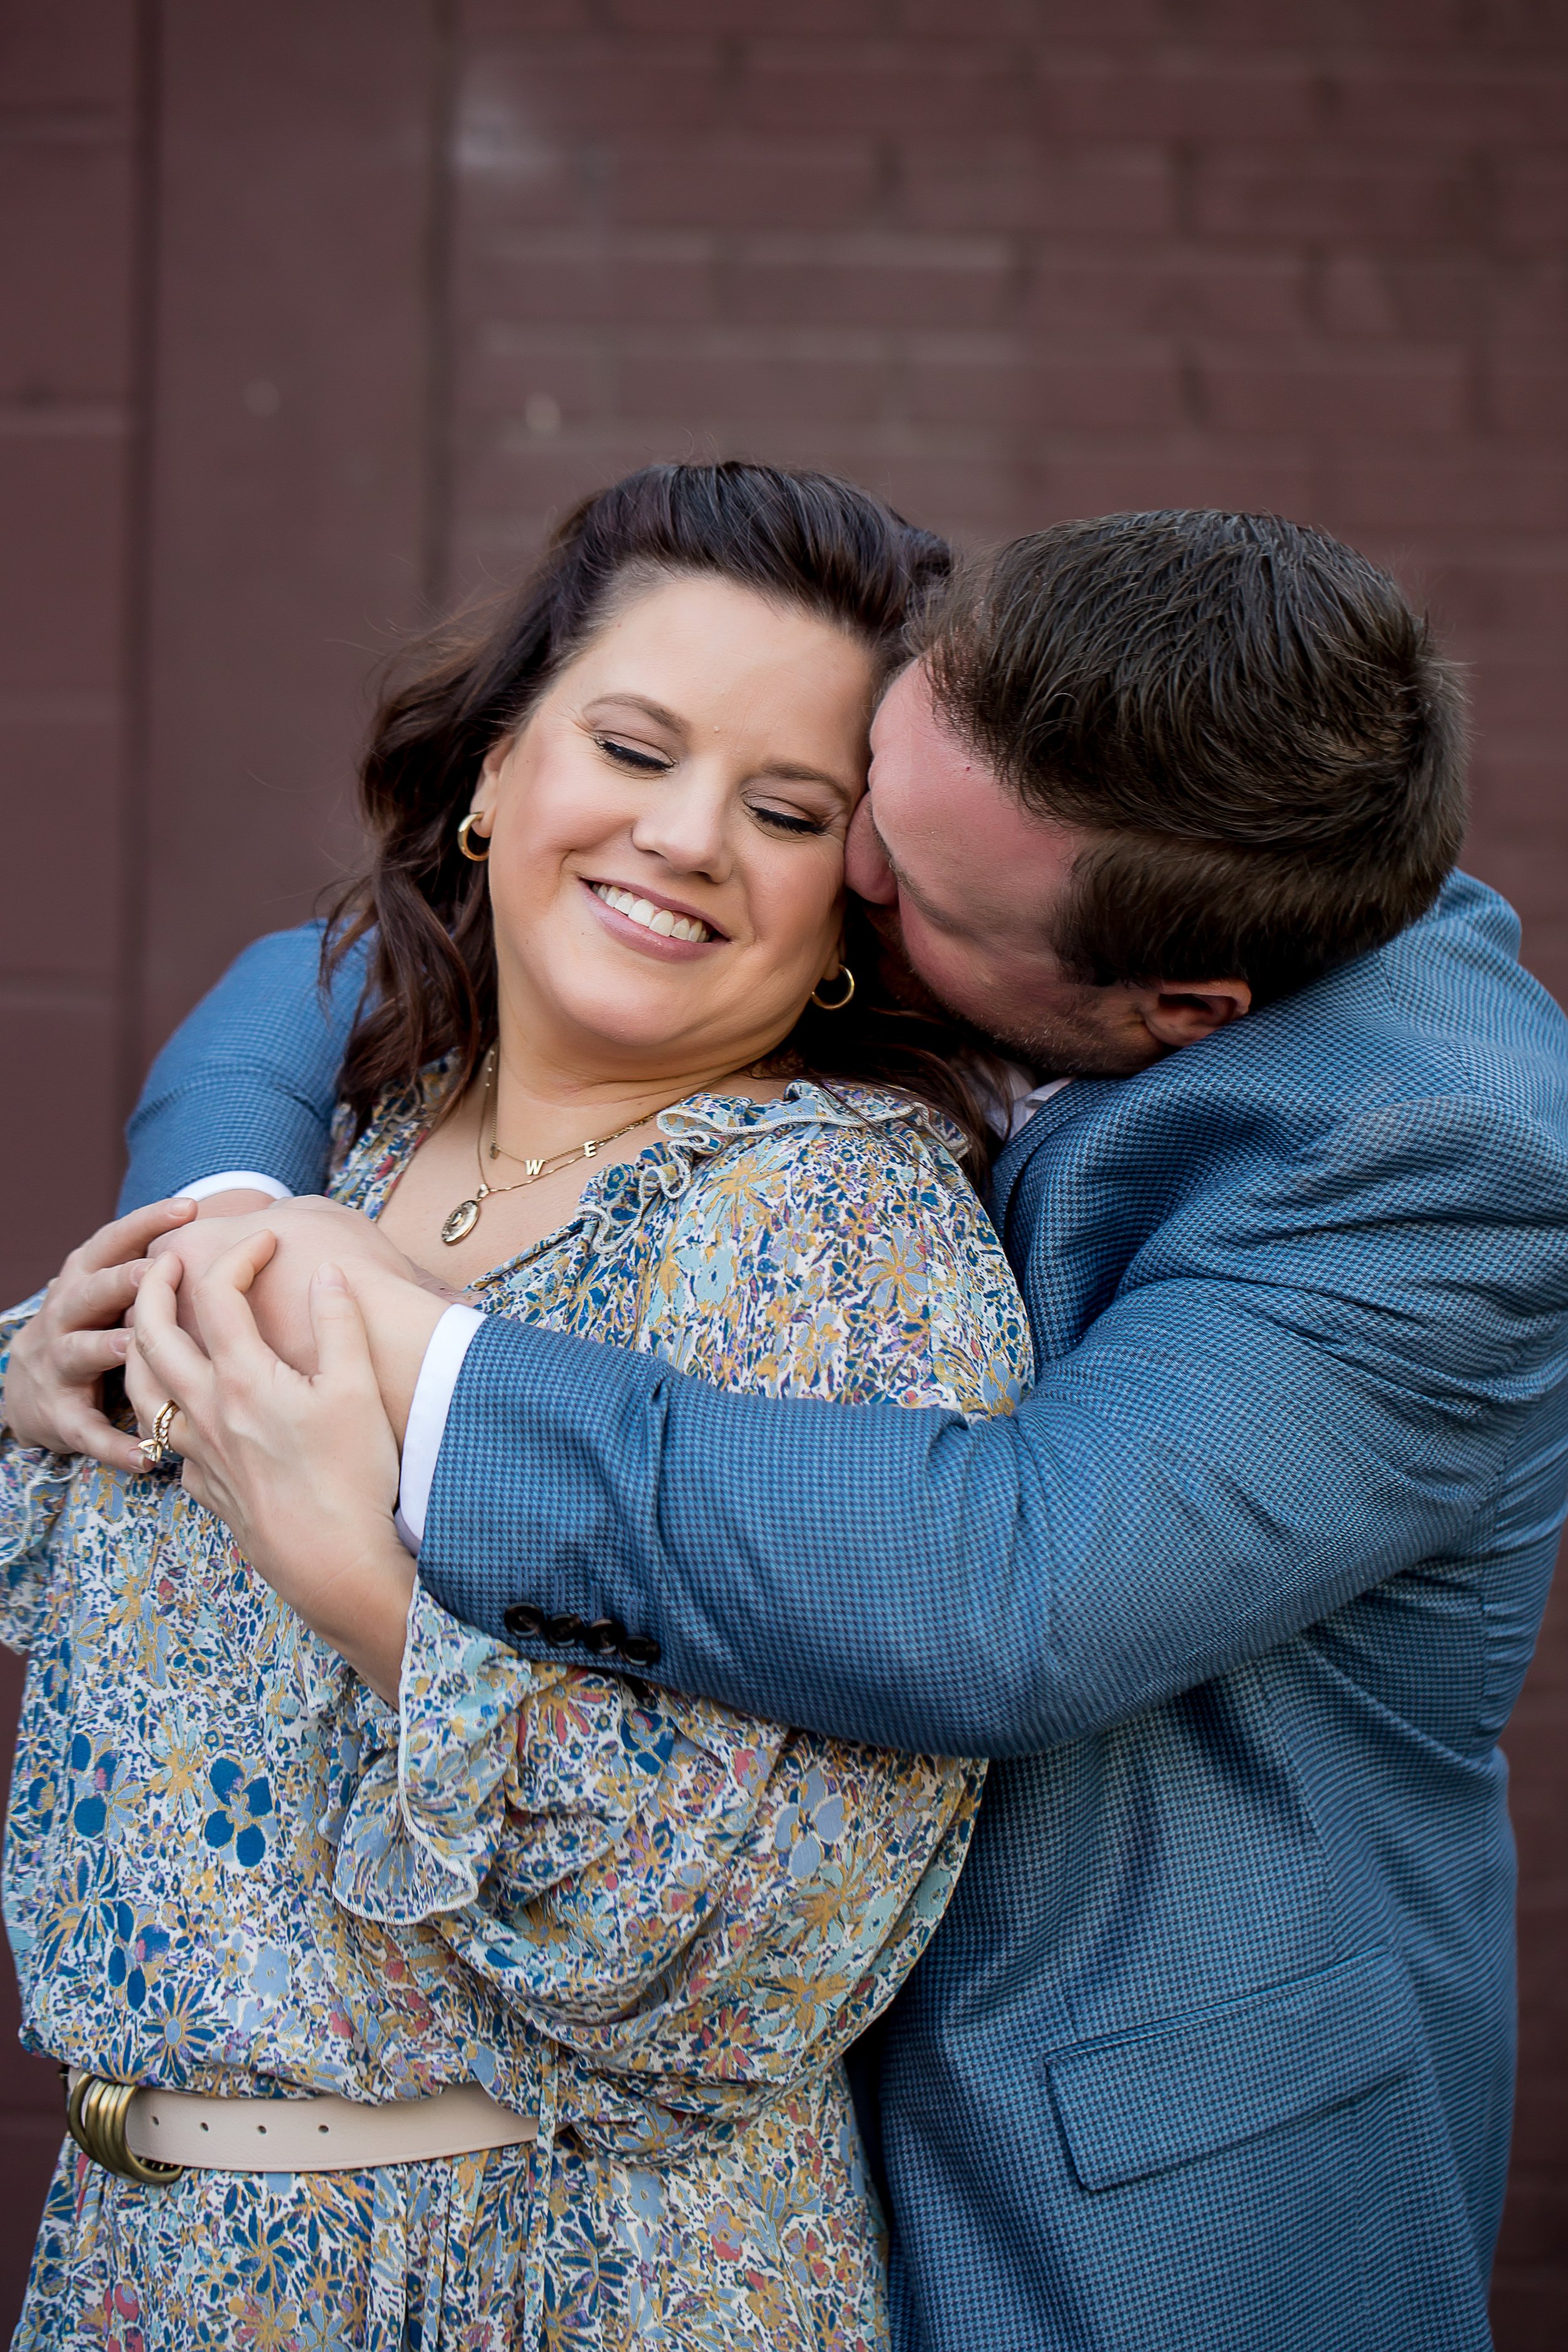 charlotte north carolina wedding and portrait photographer engagement session plaza midwood workmans friend walkabout town